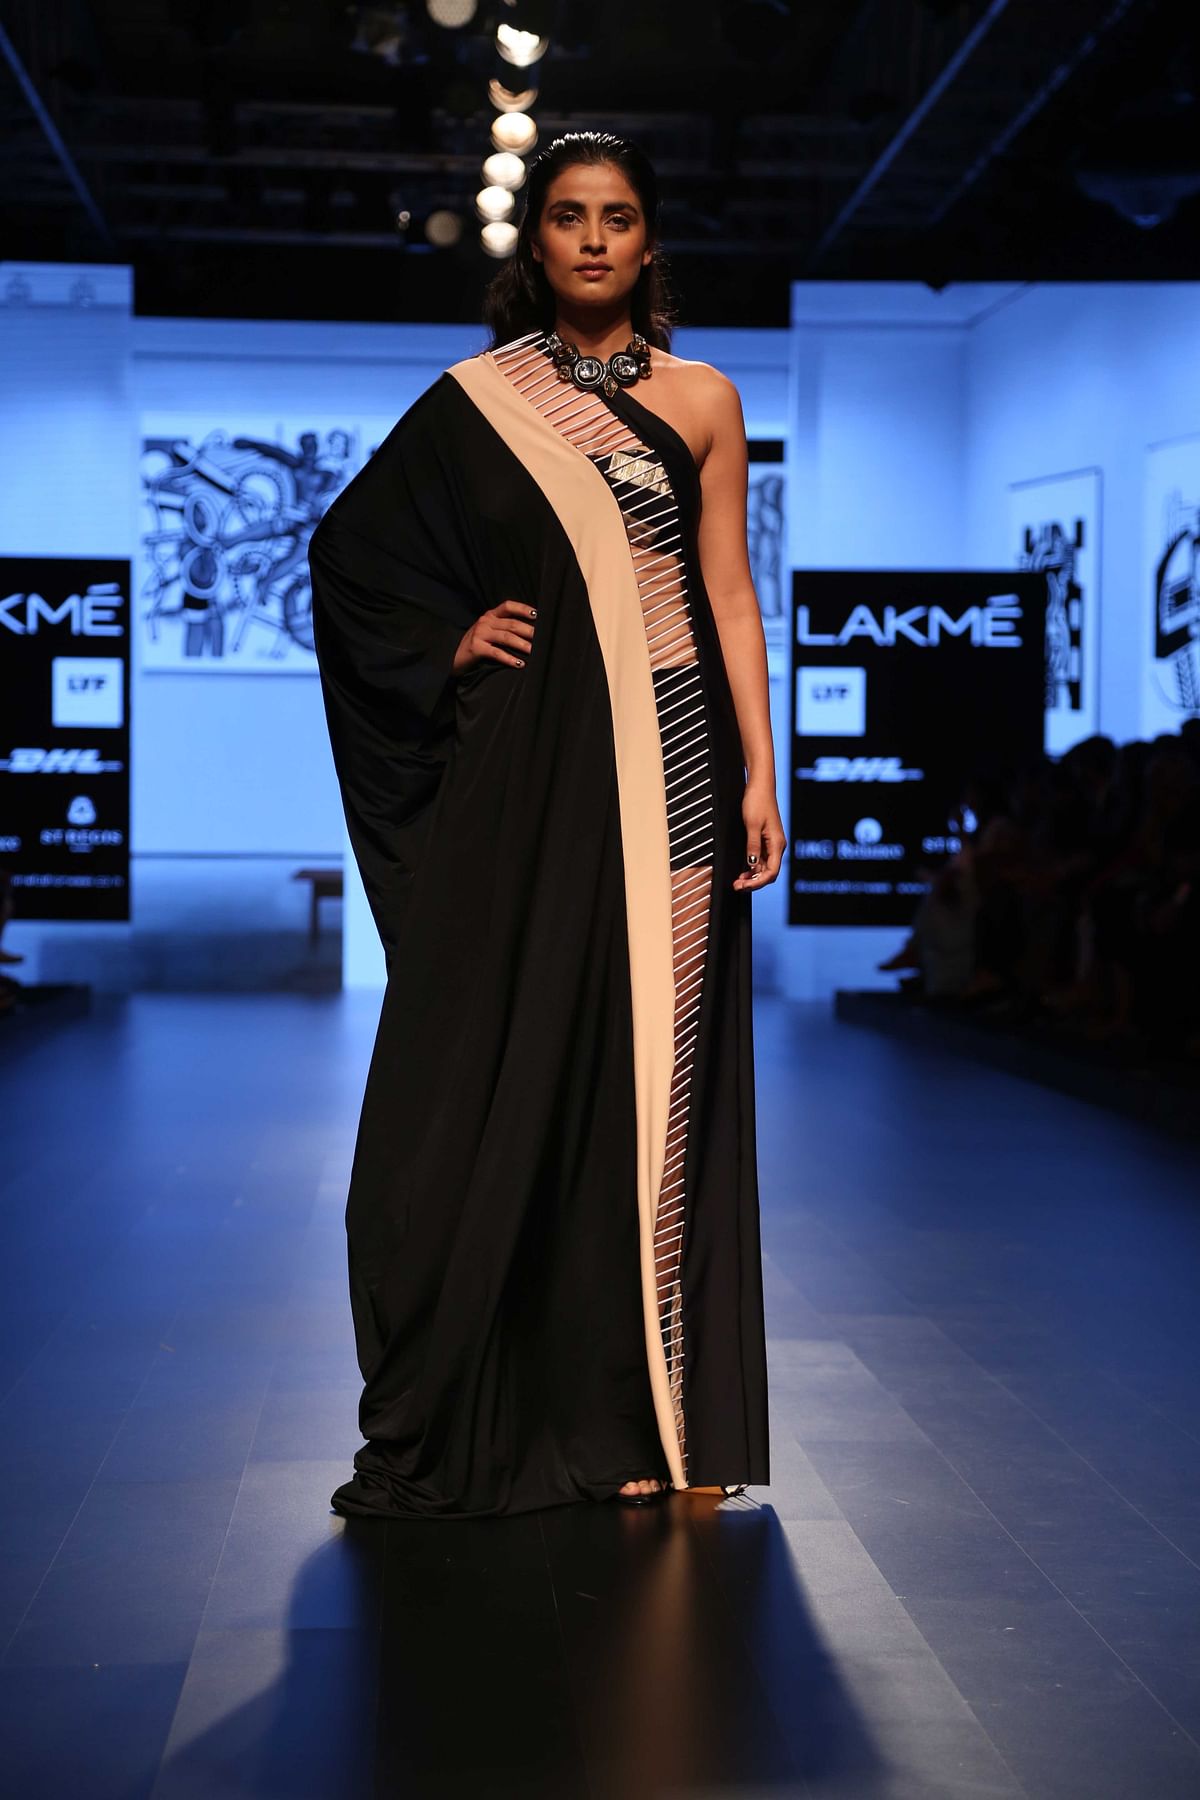 Day 4 at Lakme Fashion Week was an eclectic mix of earthy tones, gleam, glitter and so much more. What’s your pick?